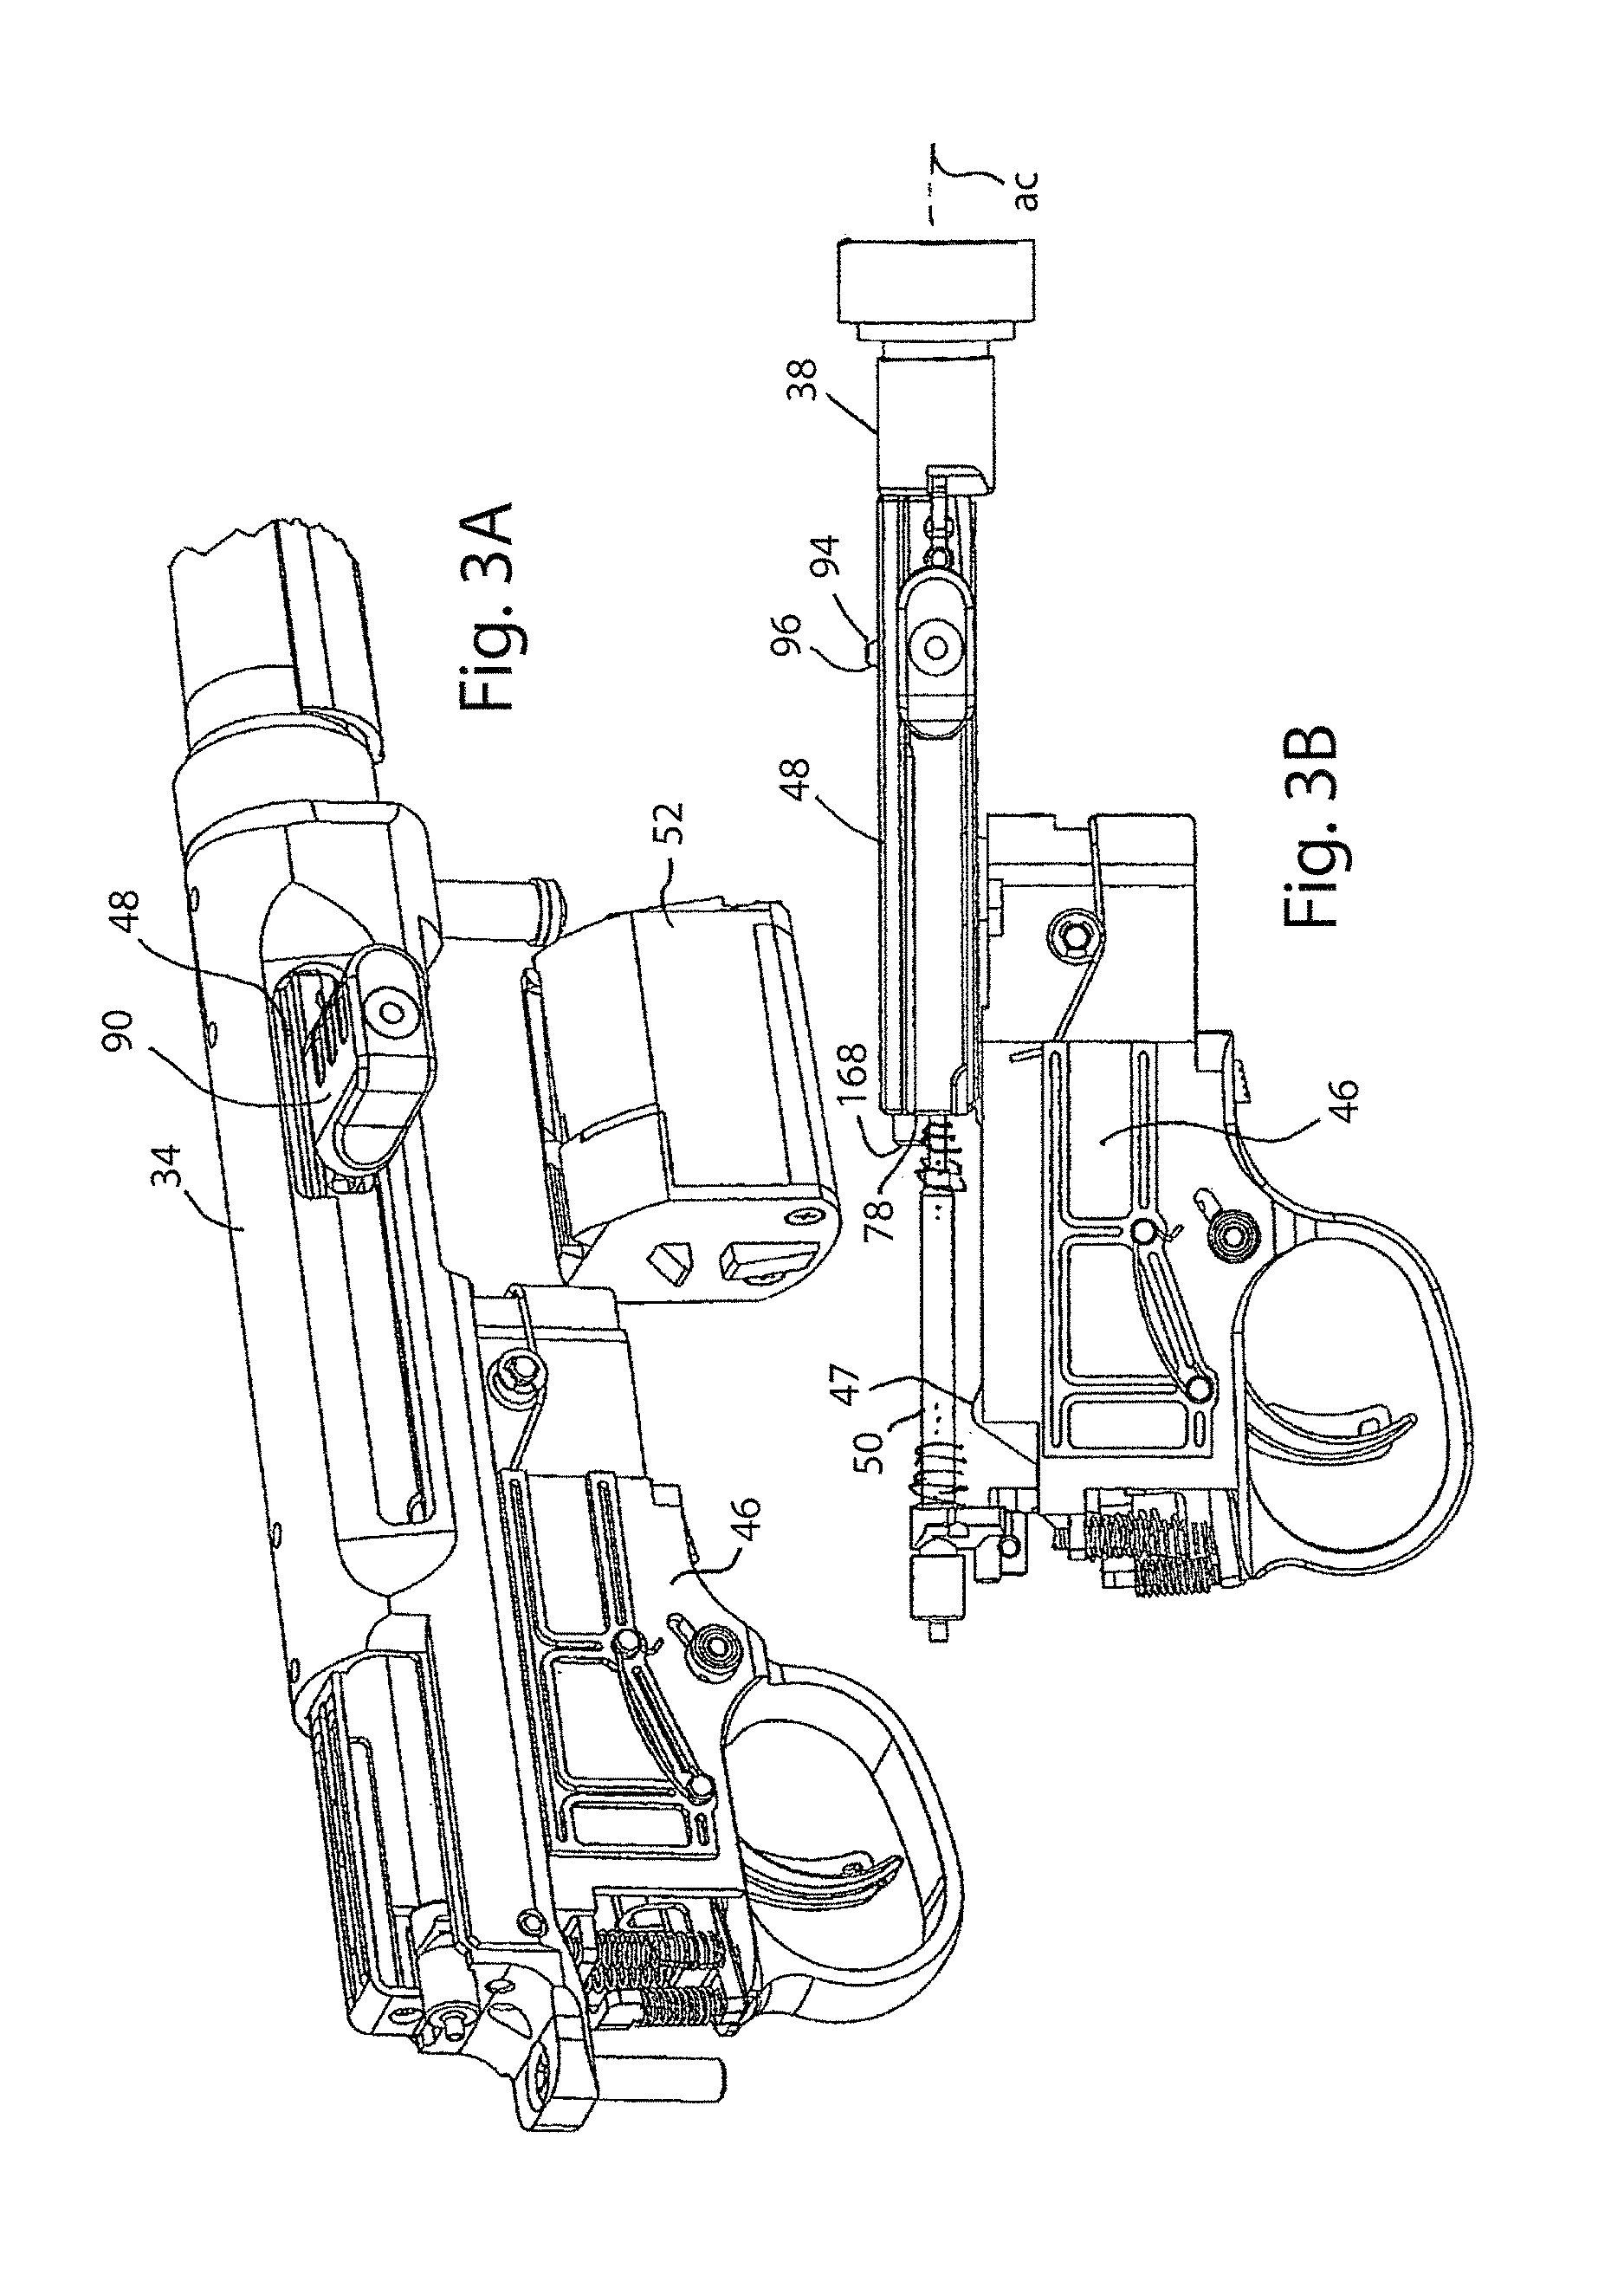 Firearm with reciprocating bolt assembly